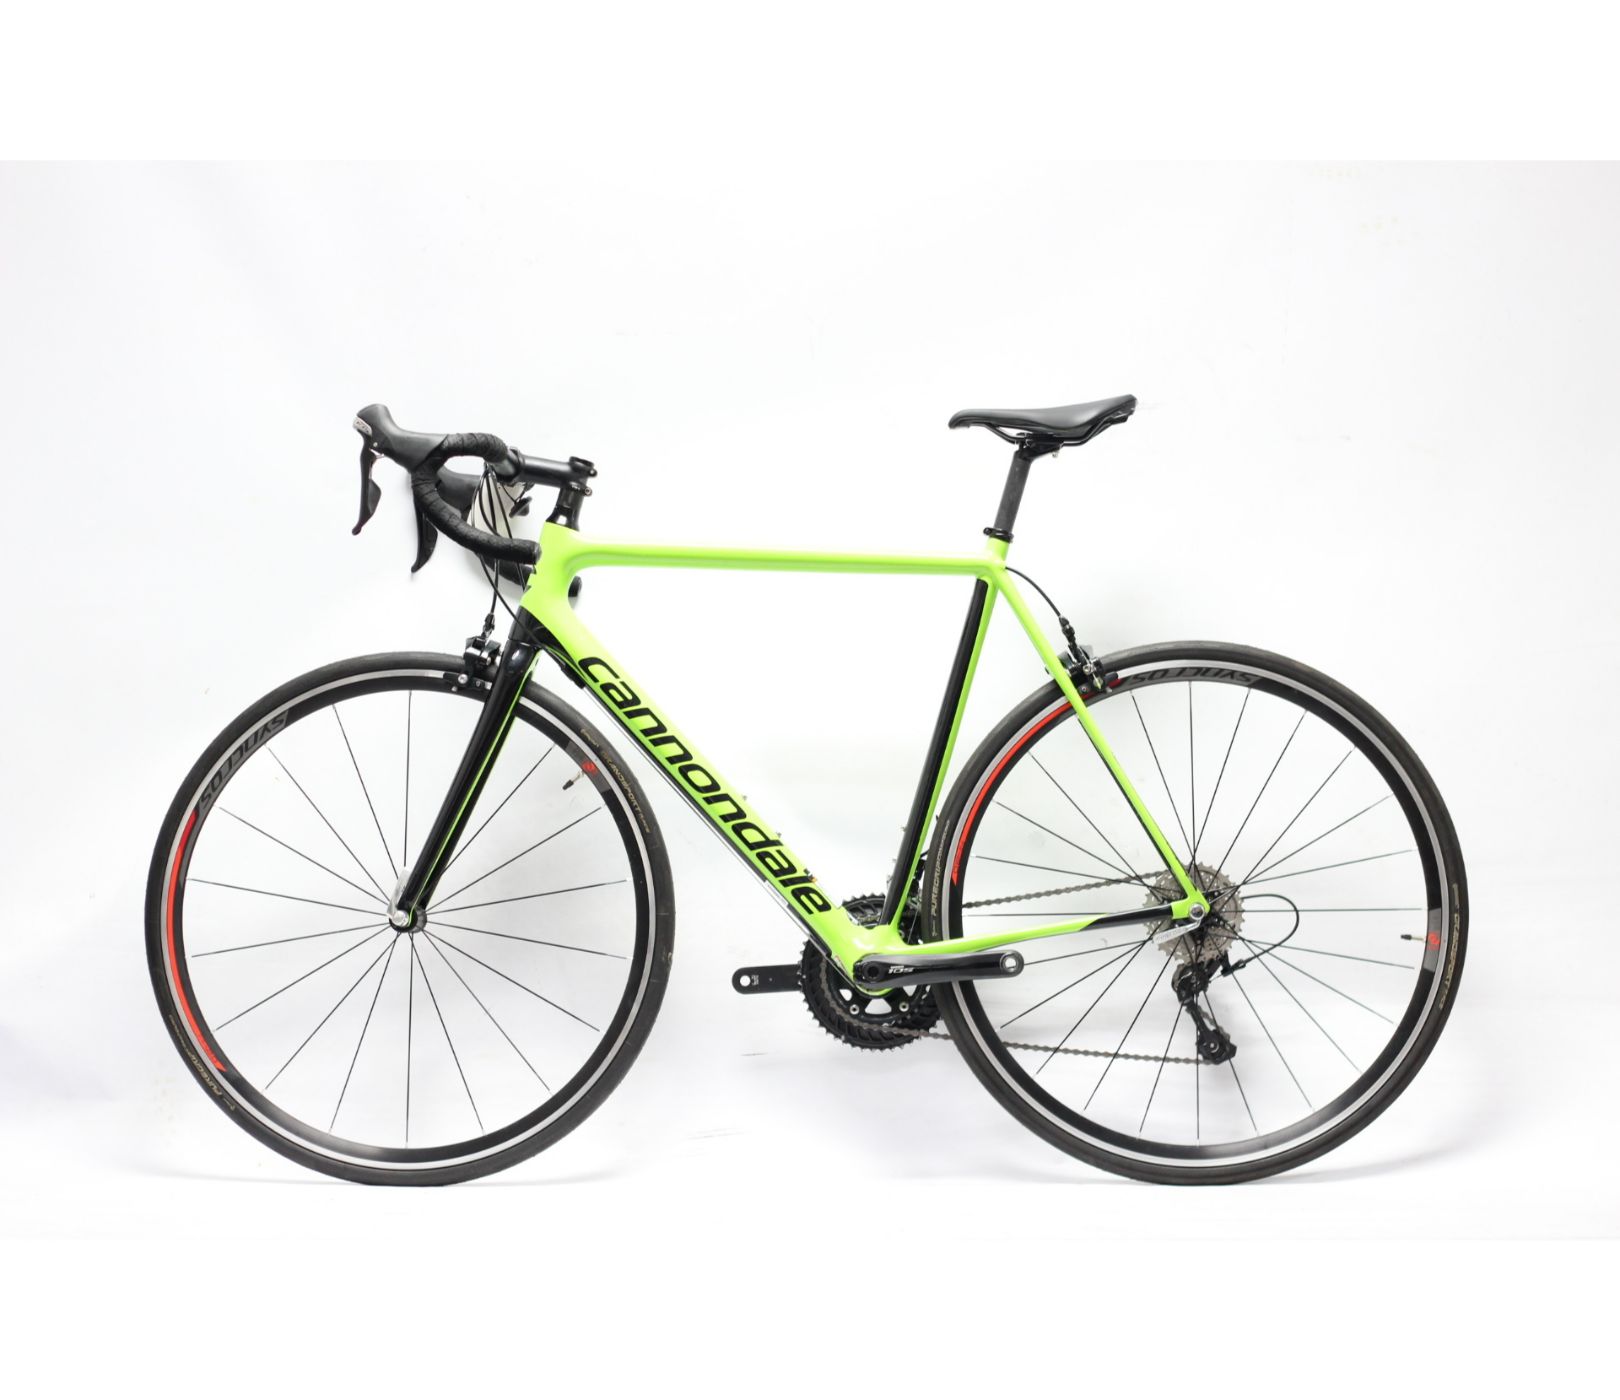 Pre-Owned Cannondale Super 6 Carbon Road Bike - Large